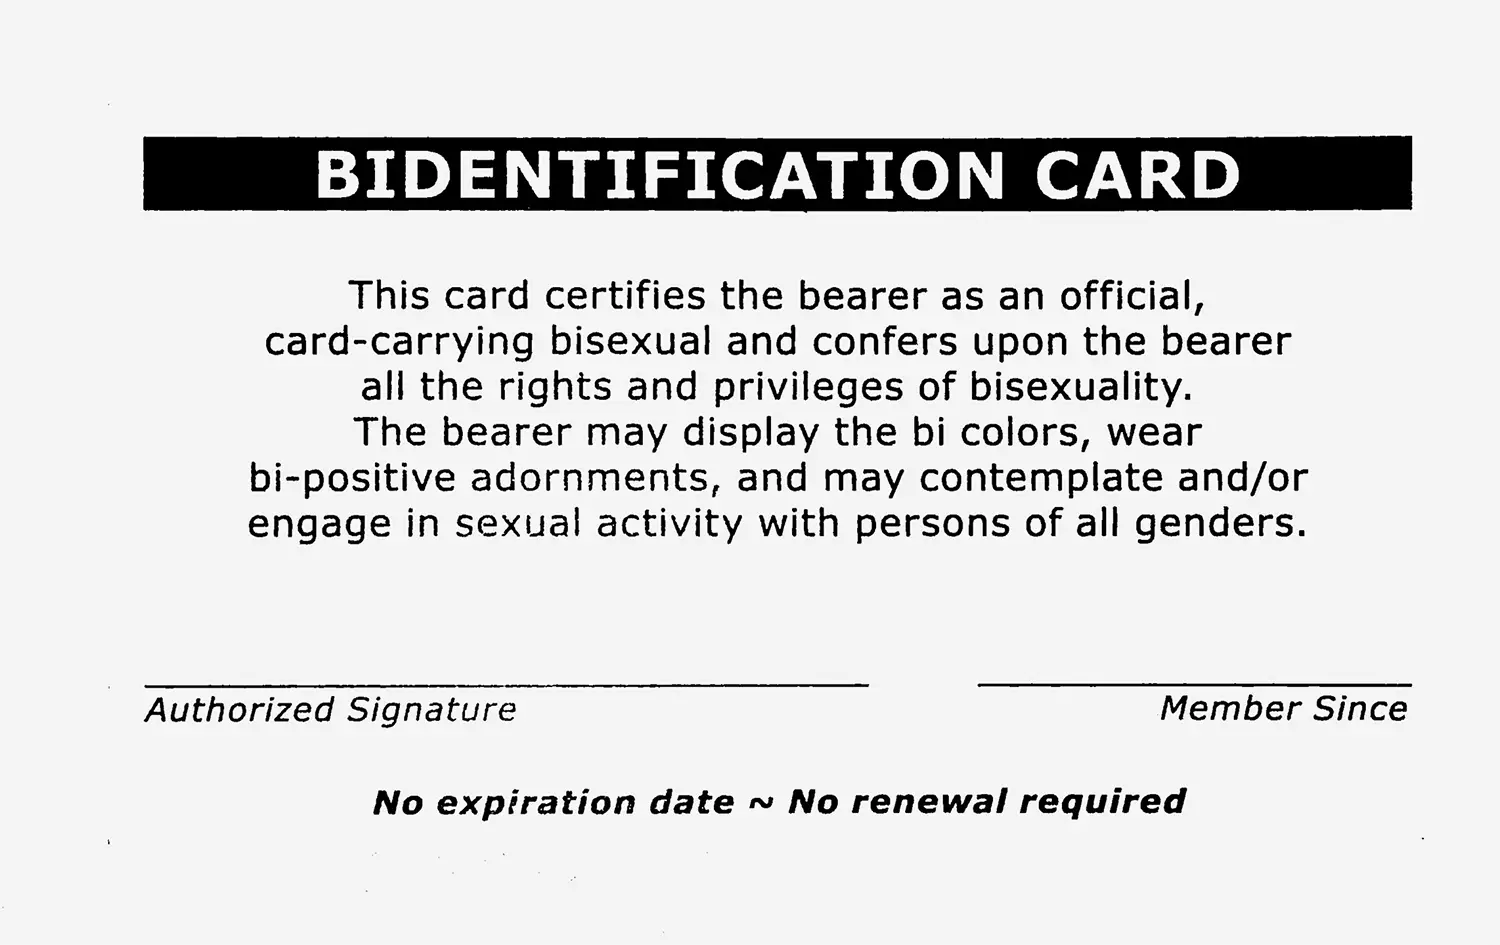 A “Bidentification Card” conferring on the carrier “all the rights and privileges of bisexuality.”